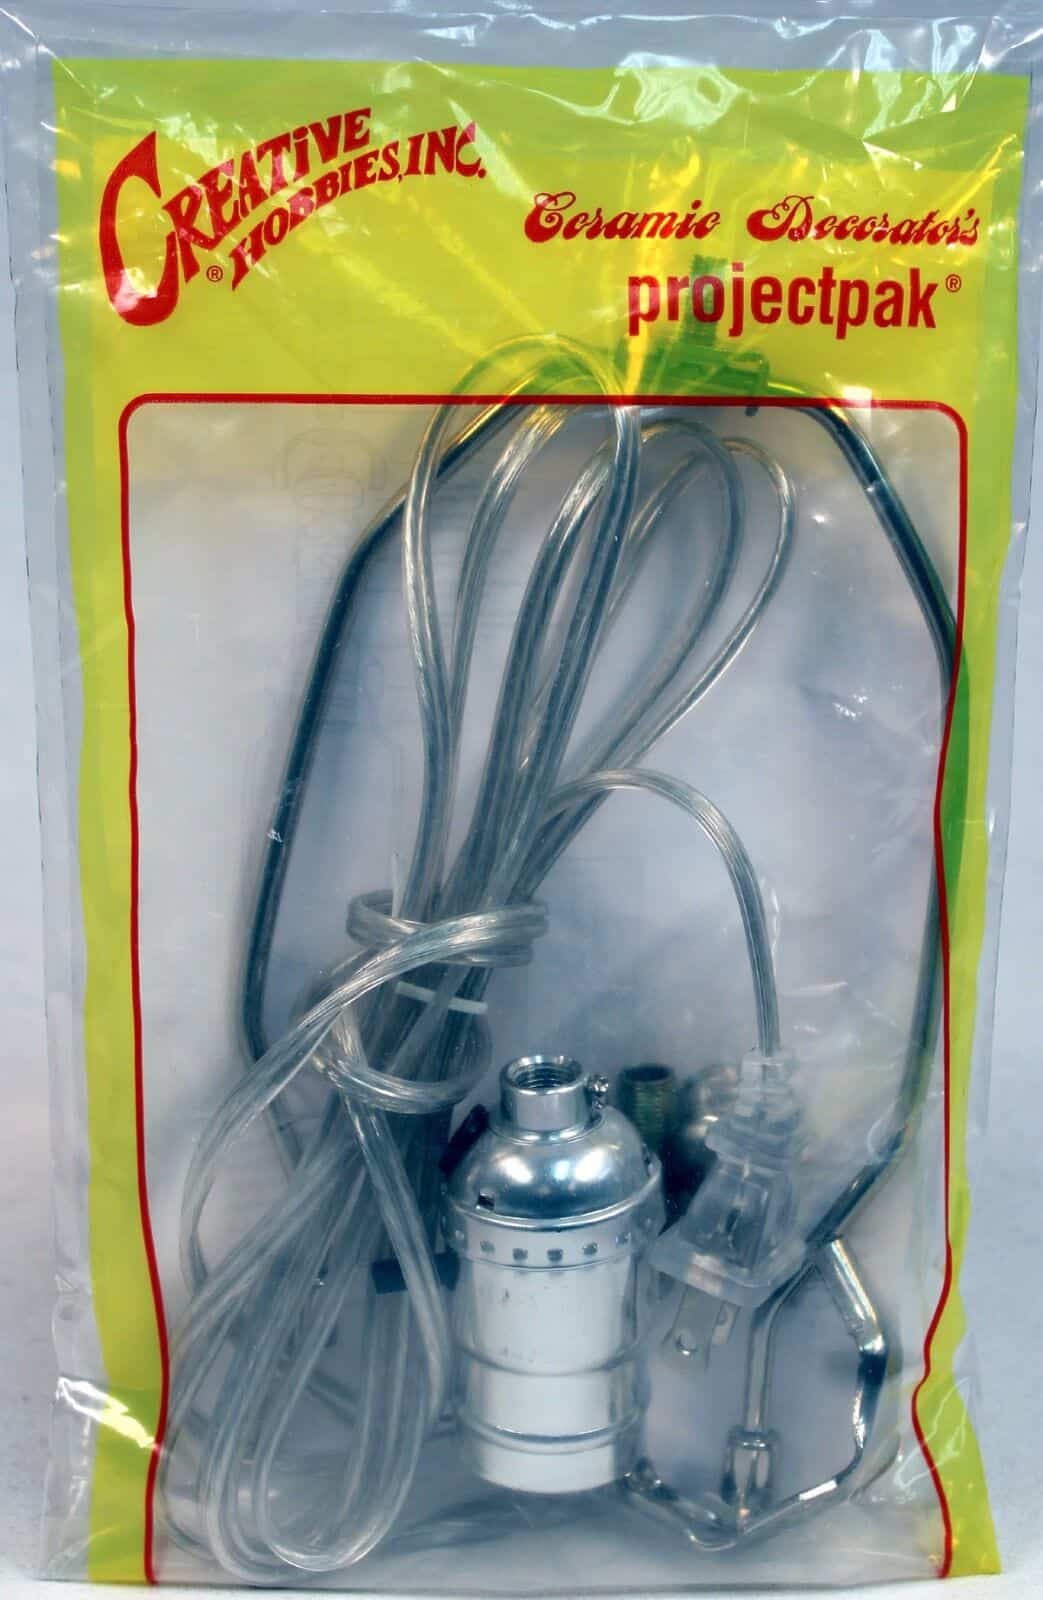 A package with a wire and a light bulb in it.